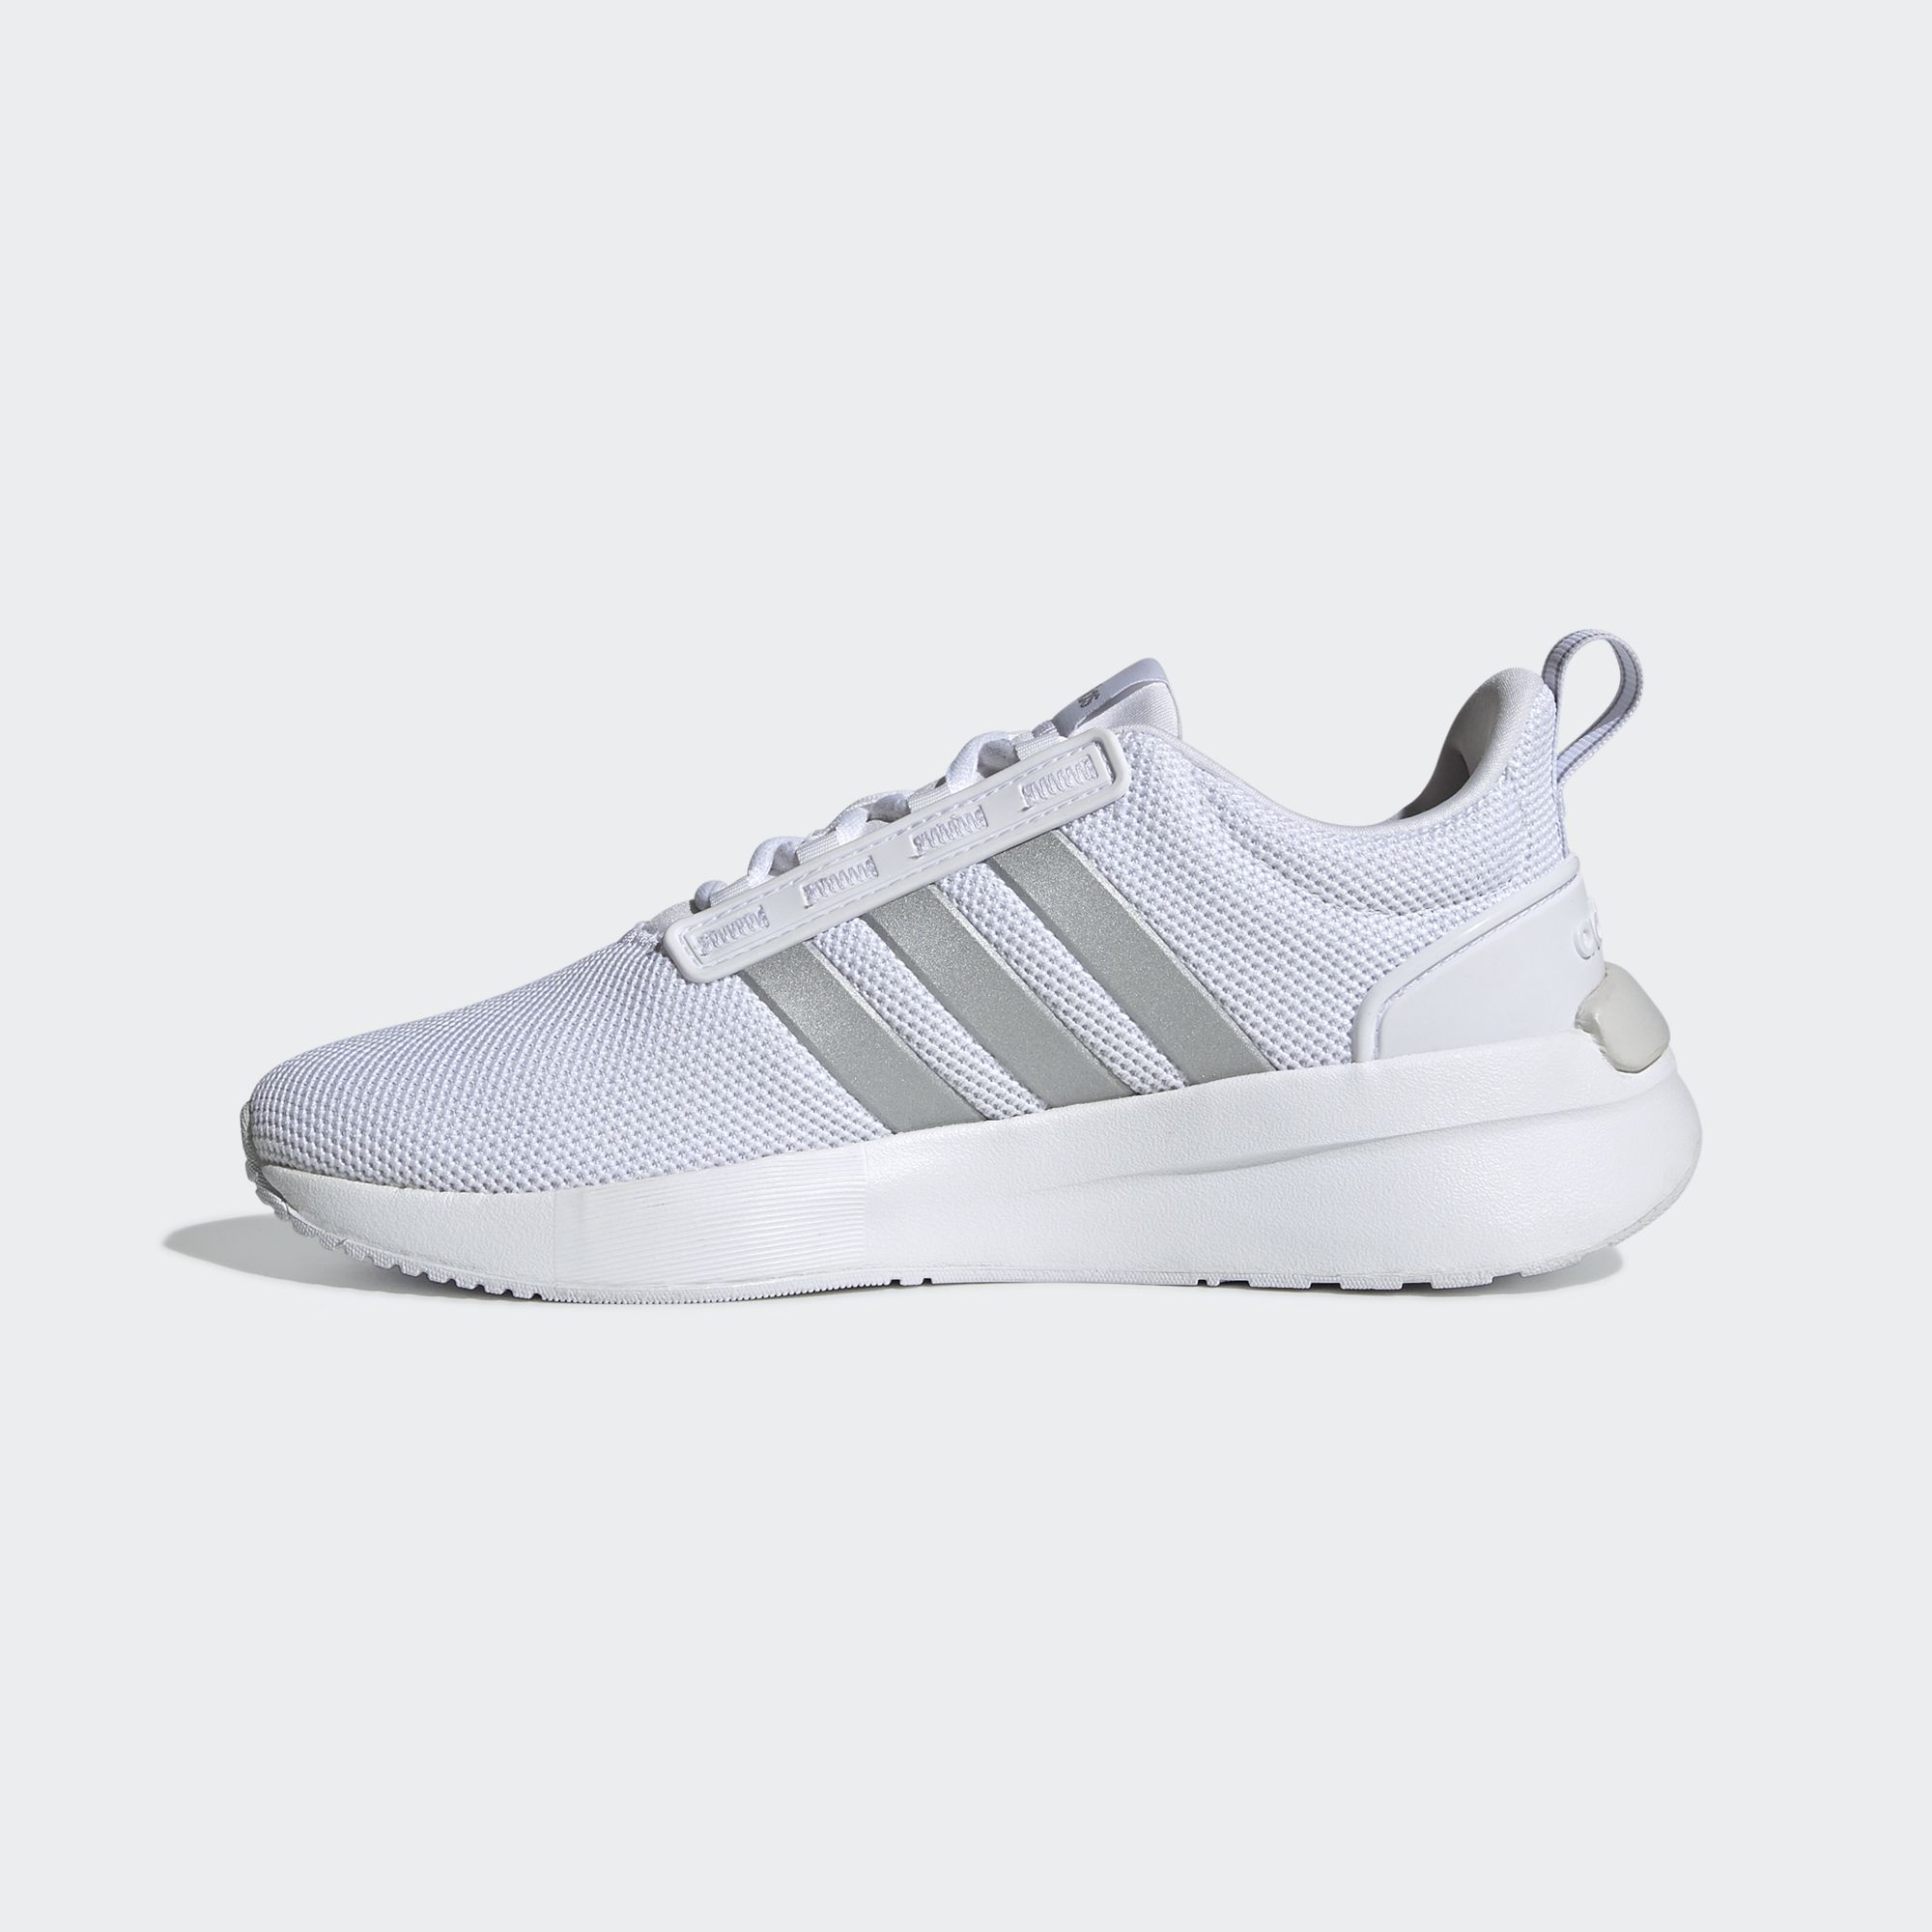  adidas  Women s Shoes for Sport and Casual Style adidas  